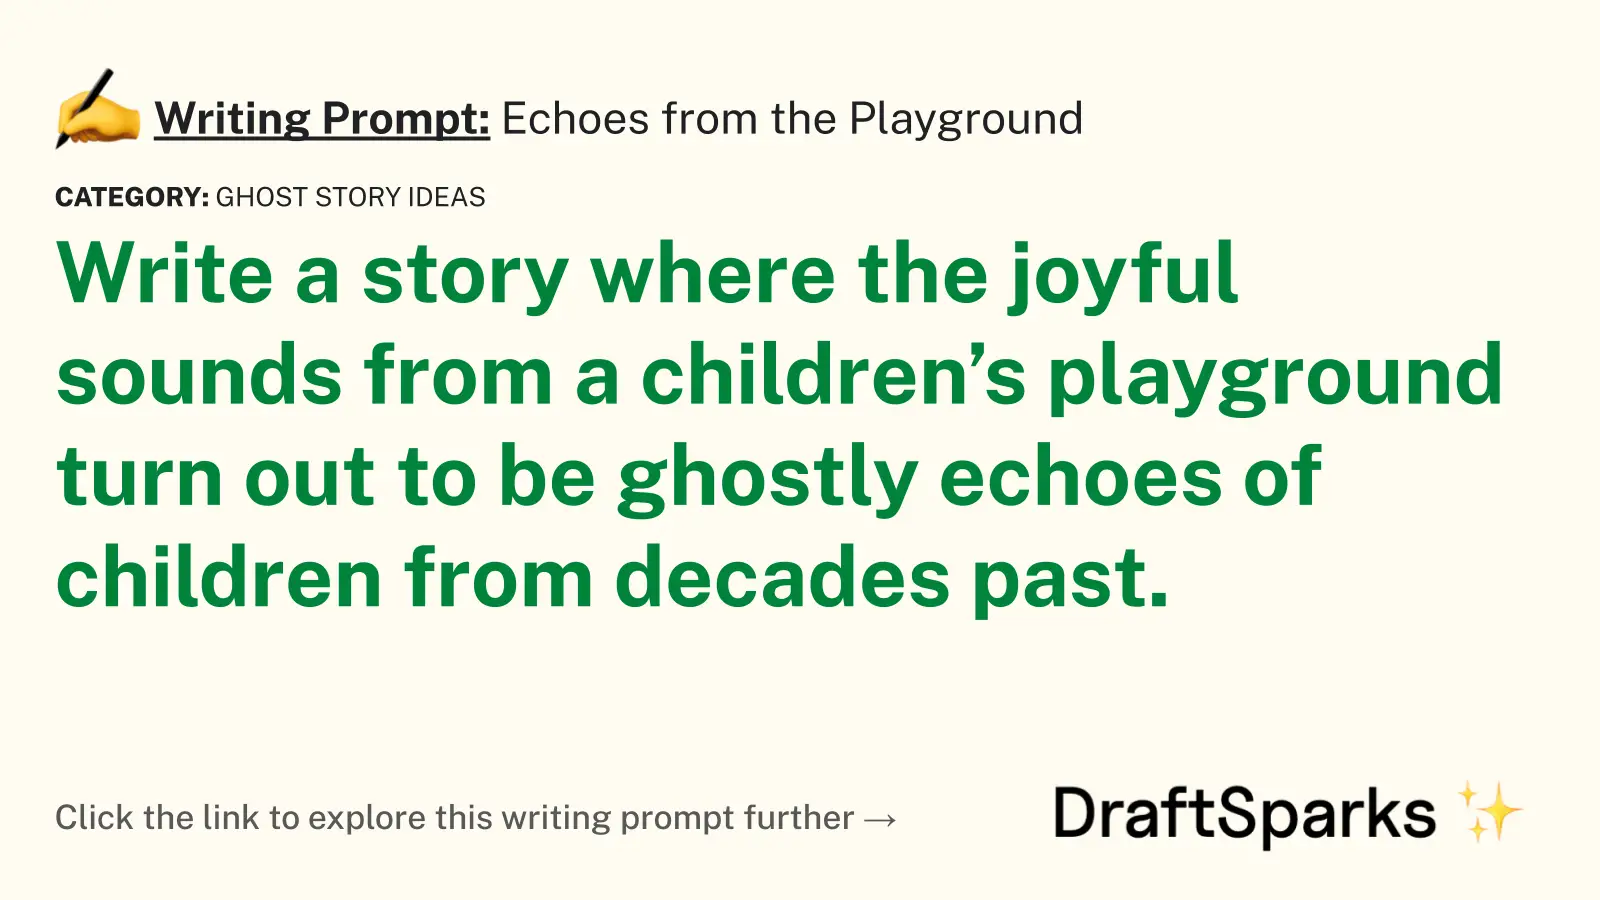 Echoes from the Playground